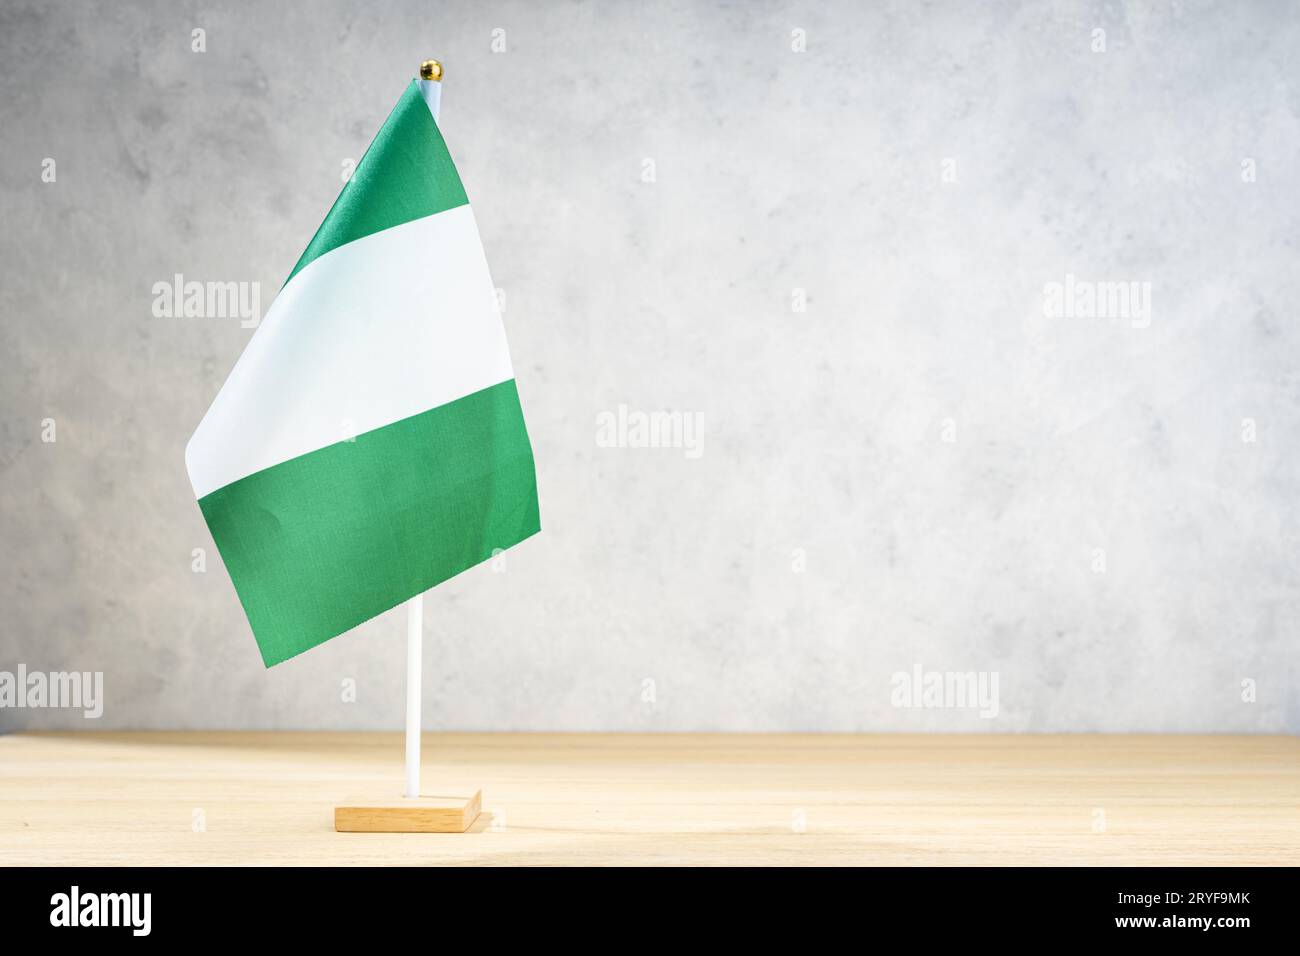 Nigeria table flag on white textured wall. Copy space for text, designs or drawings Stock Photo